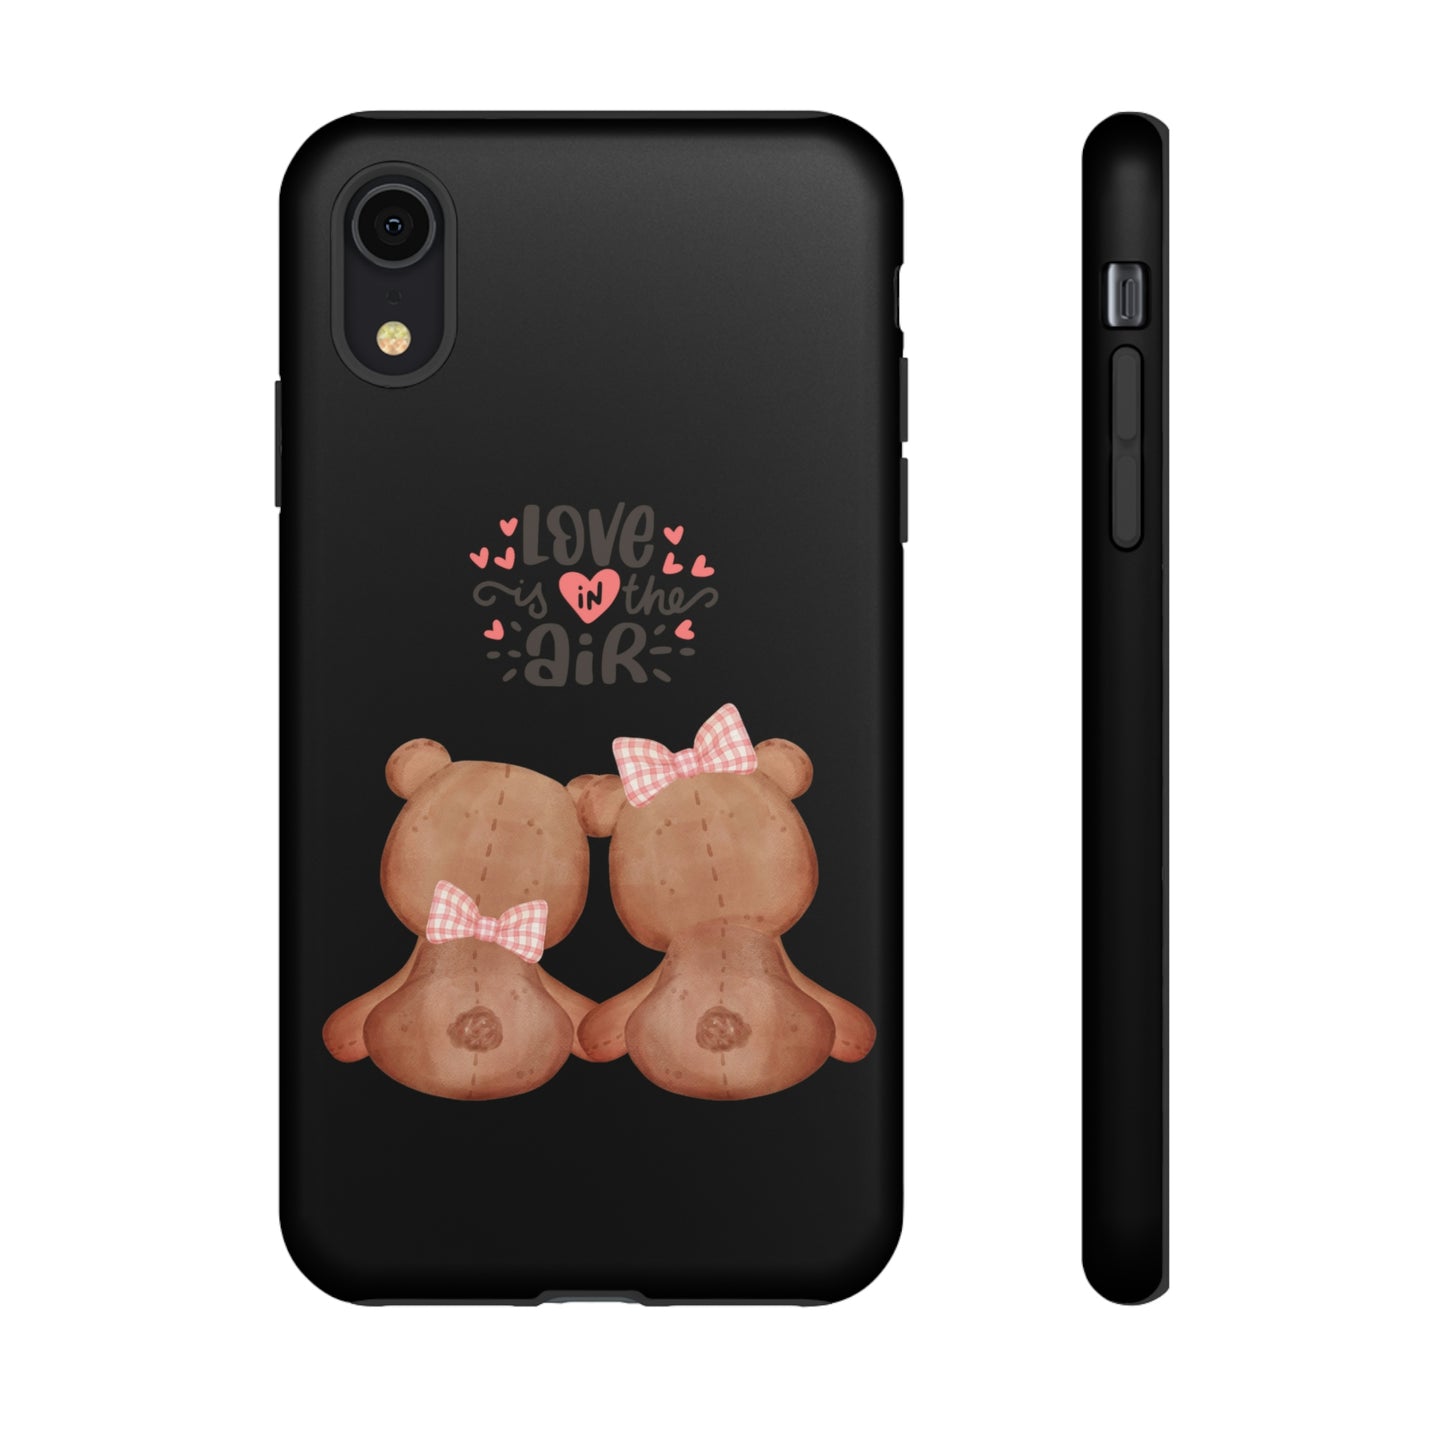 Inspire Empire || Tough Cases || Love is in the air (Black)